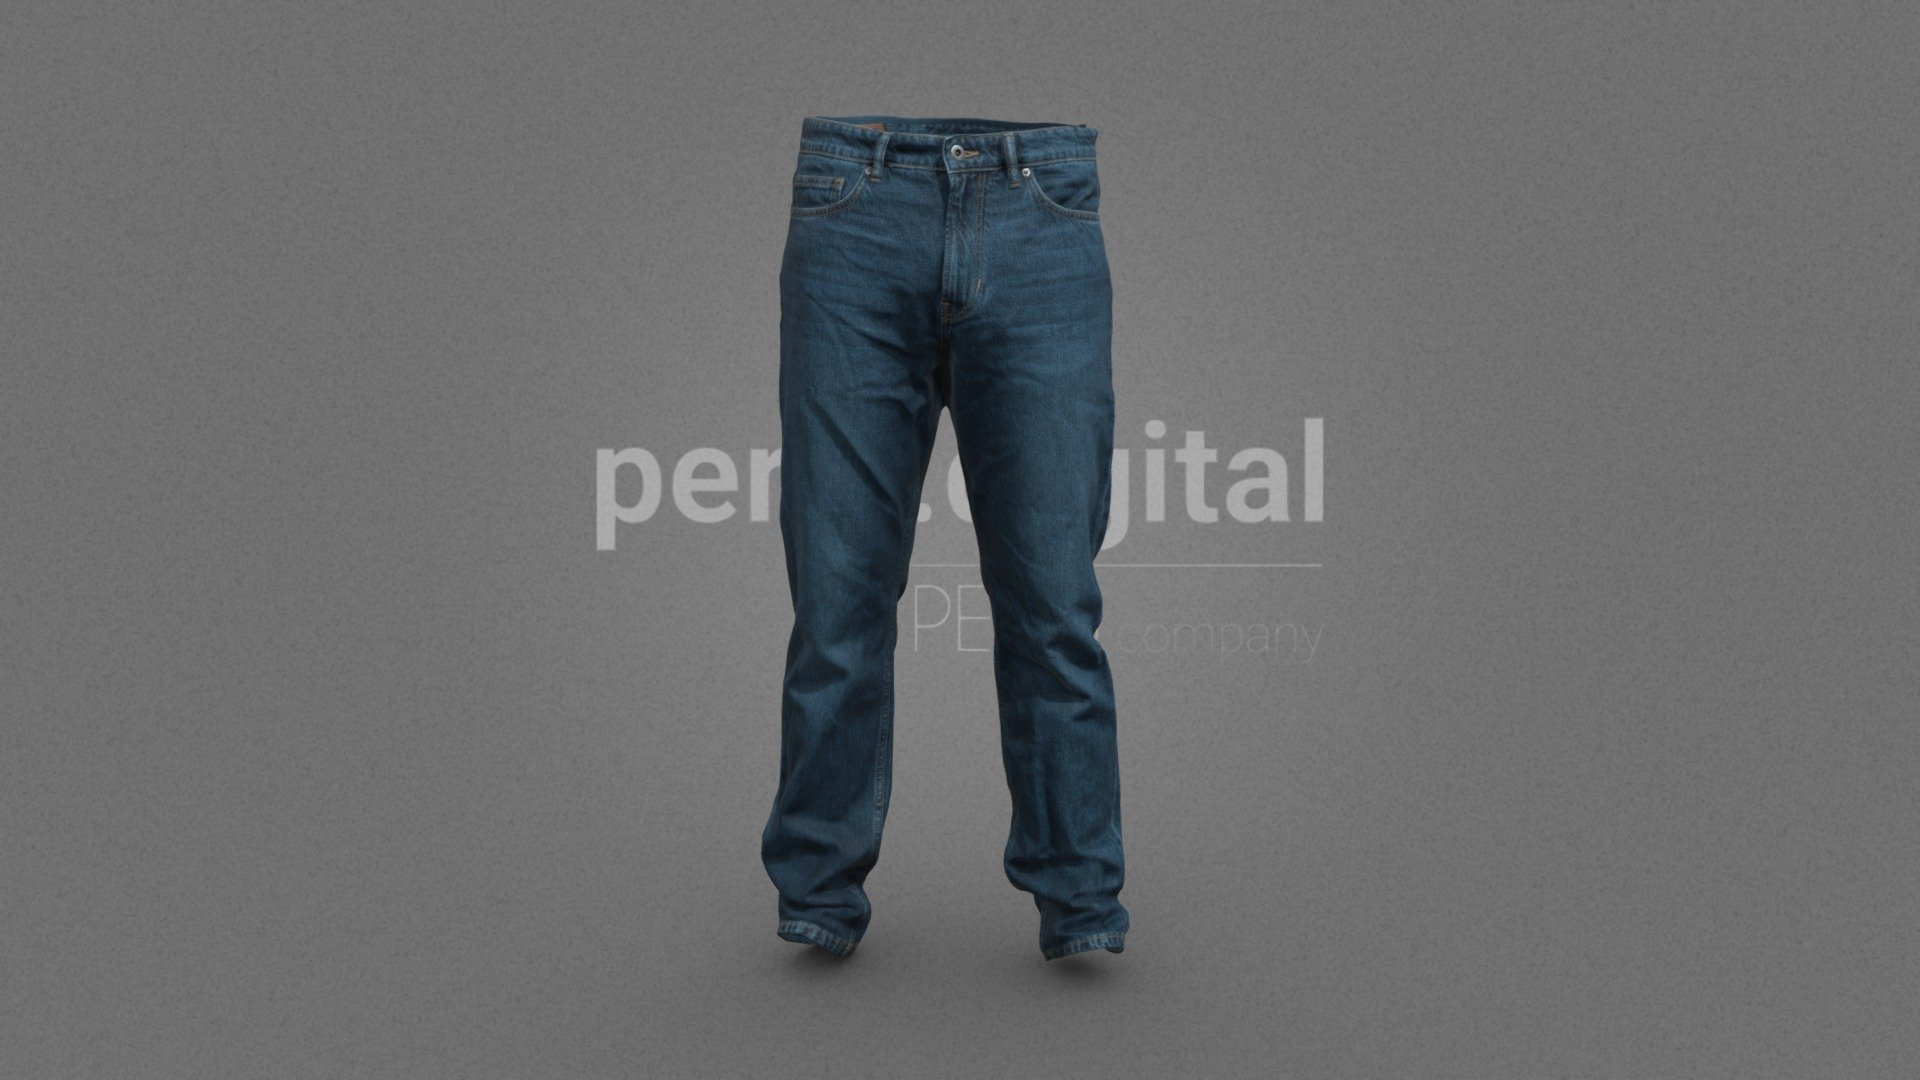 Classic blue troussers.

PERIS DIGITAL HIGH QUALITY 3D CLOTHING They are optimized for use in medium/high poly 3D scenes and optimized for rendering. We do not include characters, but they are positioned for you to include and adjust your own character. They have a LOW Poly Mesh (LODRIG) inside the Blender file (included in the AdditionalFiles), which you can use for vertex weighting or cloth simulation and thus, make the transfer of vertices or property masks from the LOW to the HIGH model. We have included in AddiotionalFiles, the texture maps in high resolution, as well as the Displacement maps in high resolution too, so you can perform extreme point of view with your 3D cameras. With the Blender file (included in AdditionalFiles) you will be able to edit any aspect of the set . Enjoy it!

Web: https://peris.digital/ - Daily Clothing Series - Cardigan Troussers - 3D model by Peris Digital (@perisdigital) 3d model